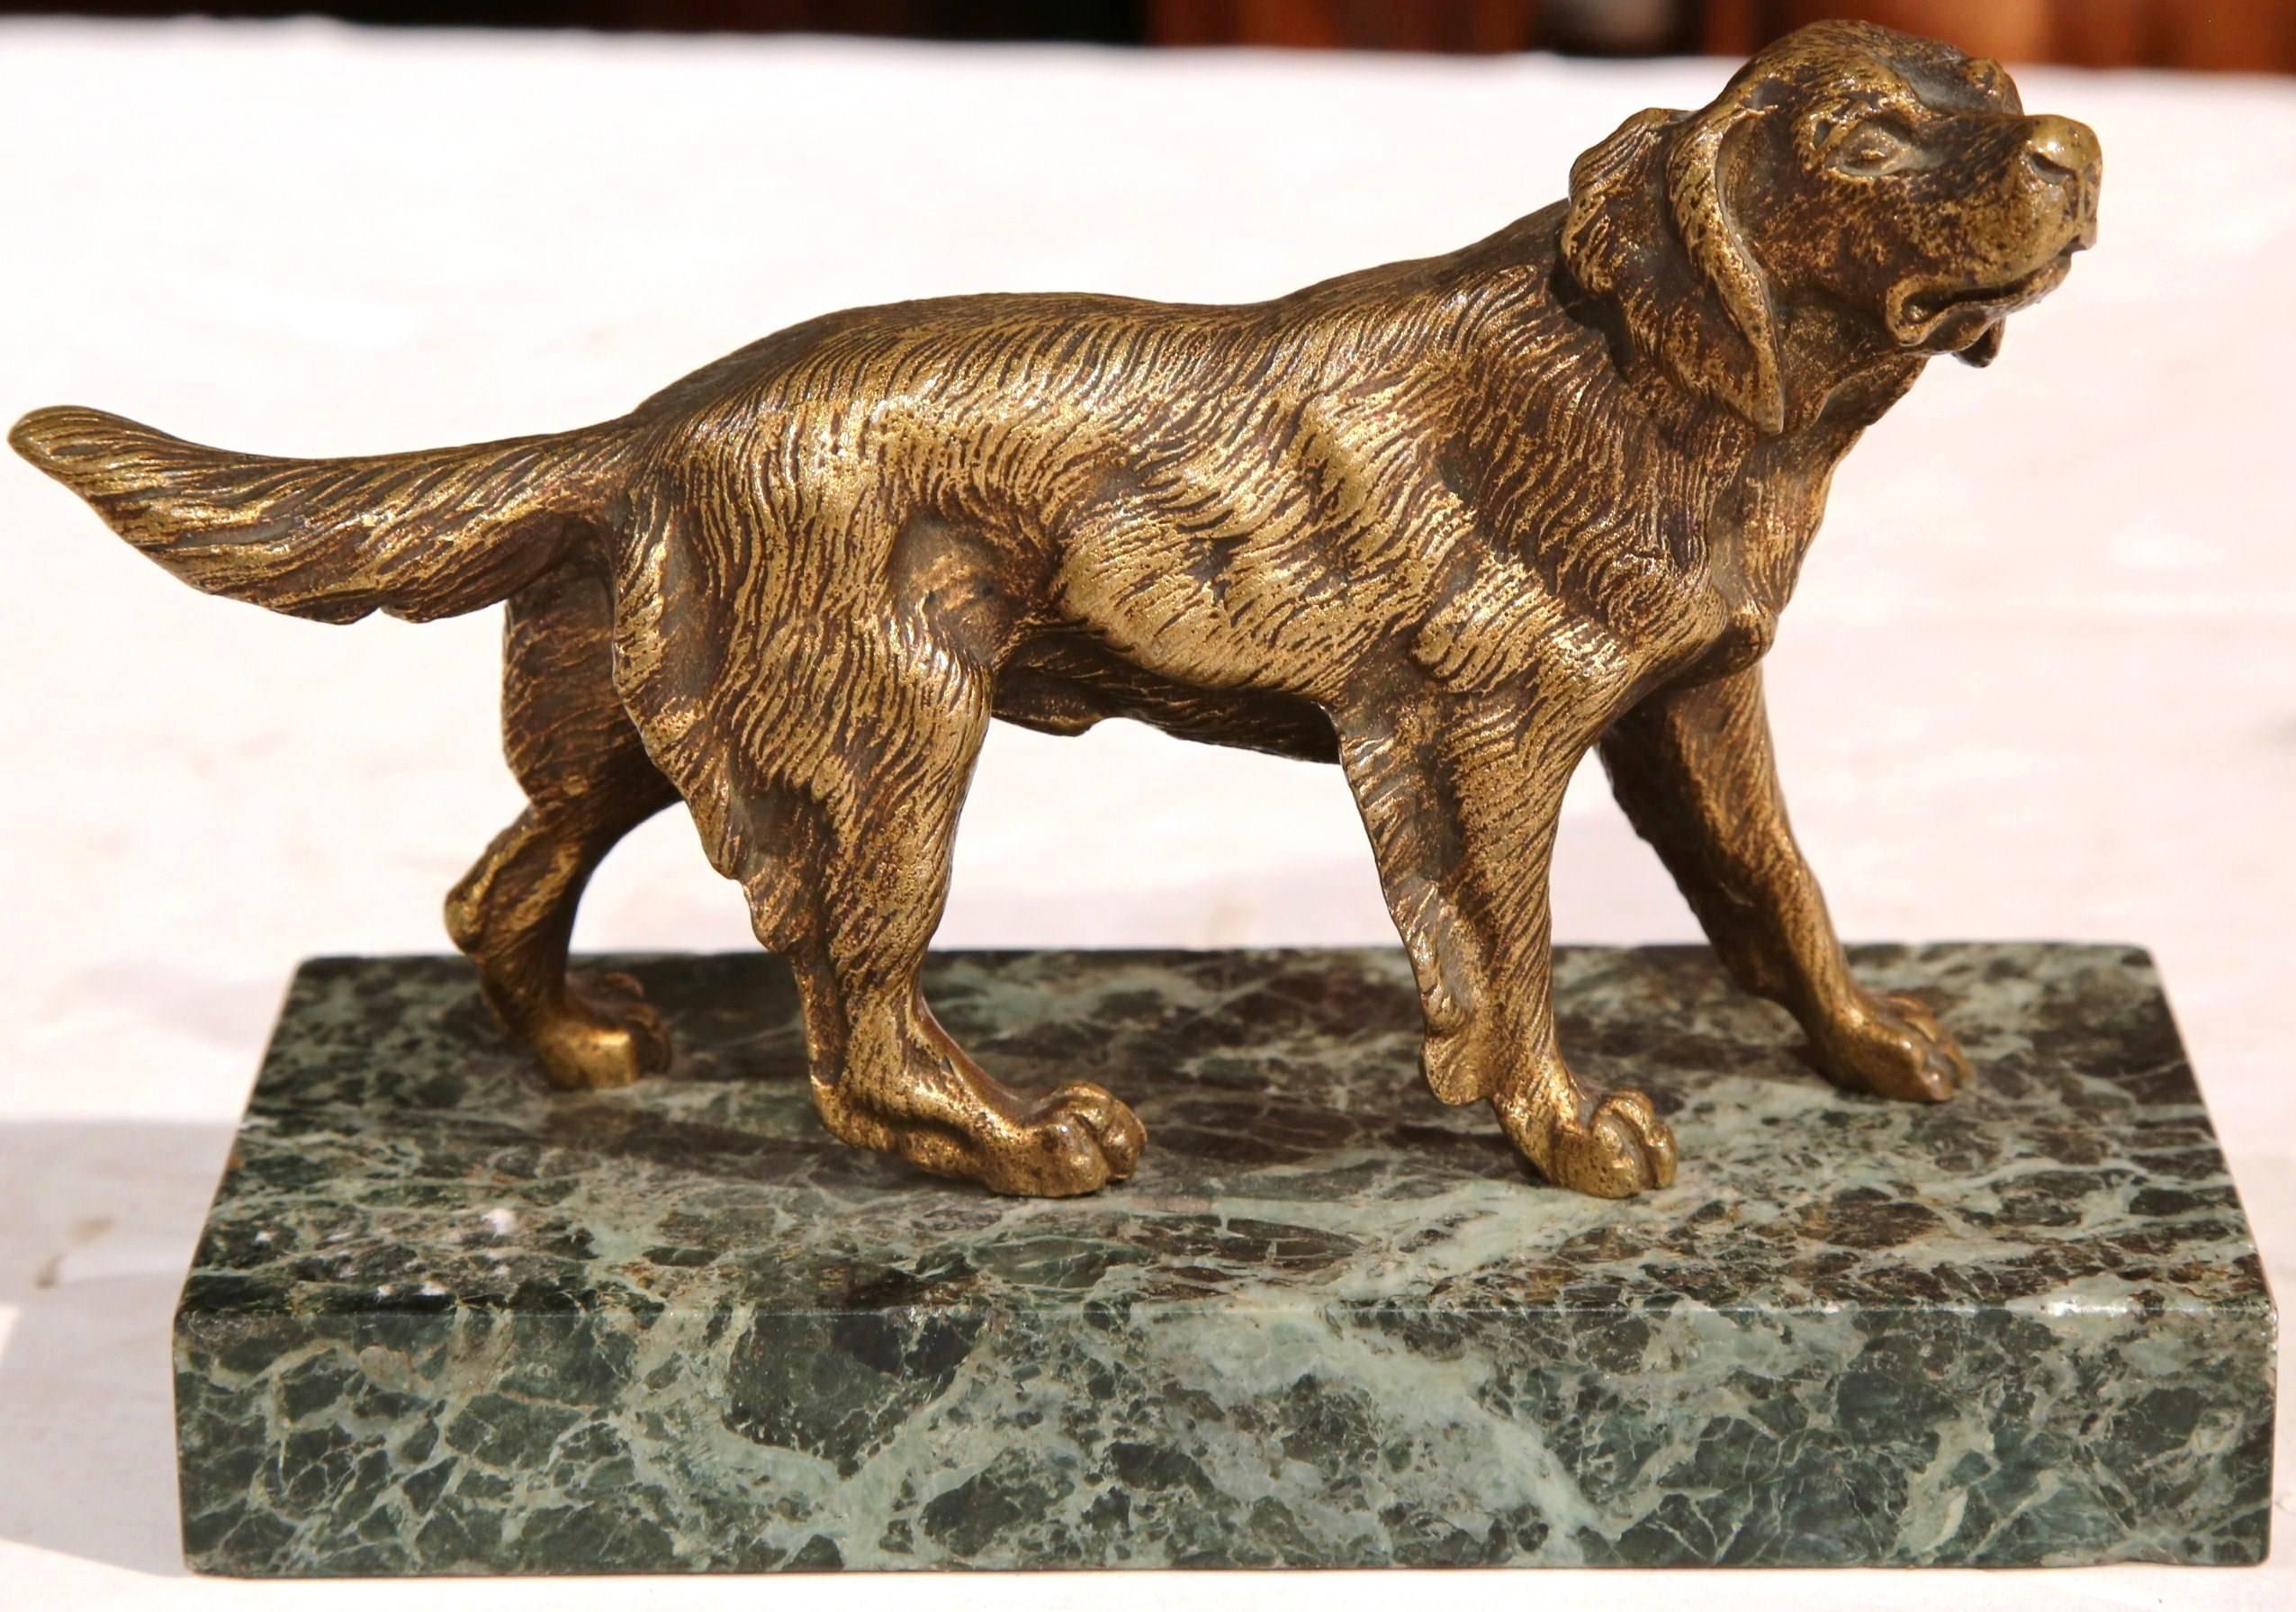 This beautiful, small bronze dog sculpture on a marble base was crafted in France, circa 1920. The hunting setter dog stands on a green rectangular base. From the position of the dog to the details through its face and fur, the sculpture is artfully